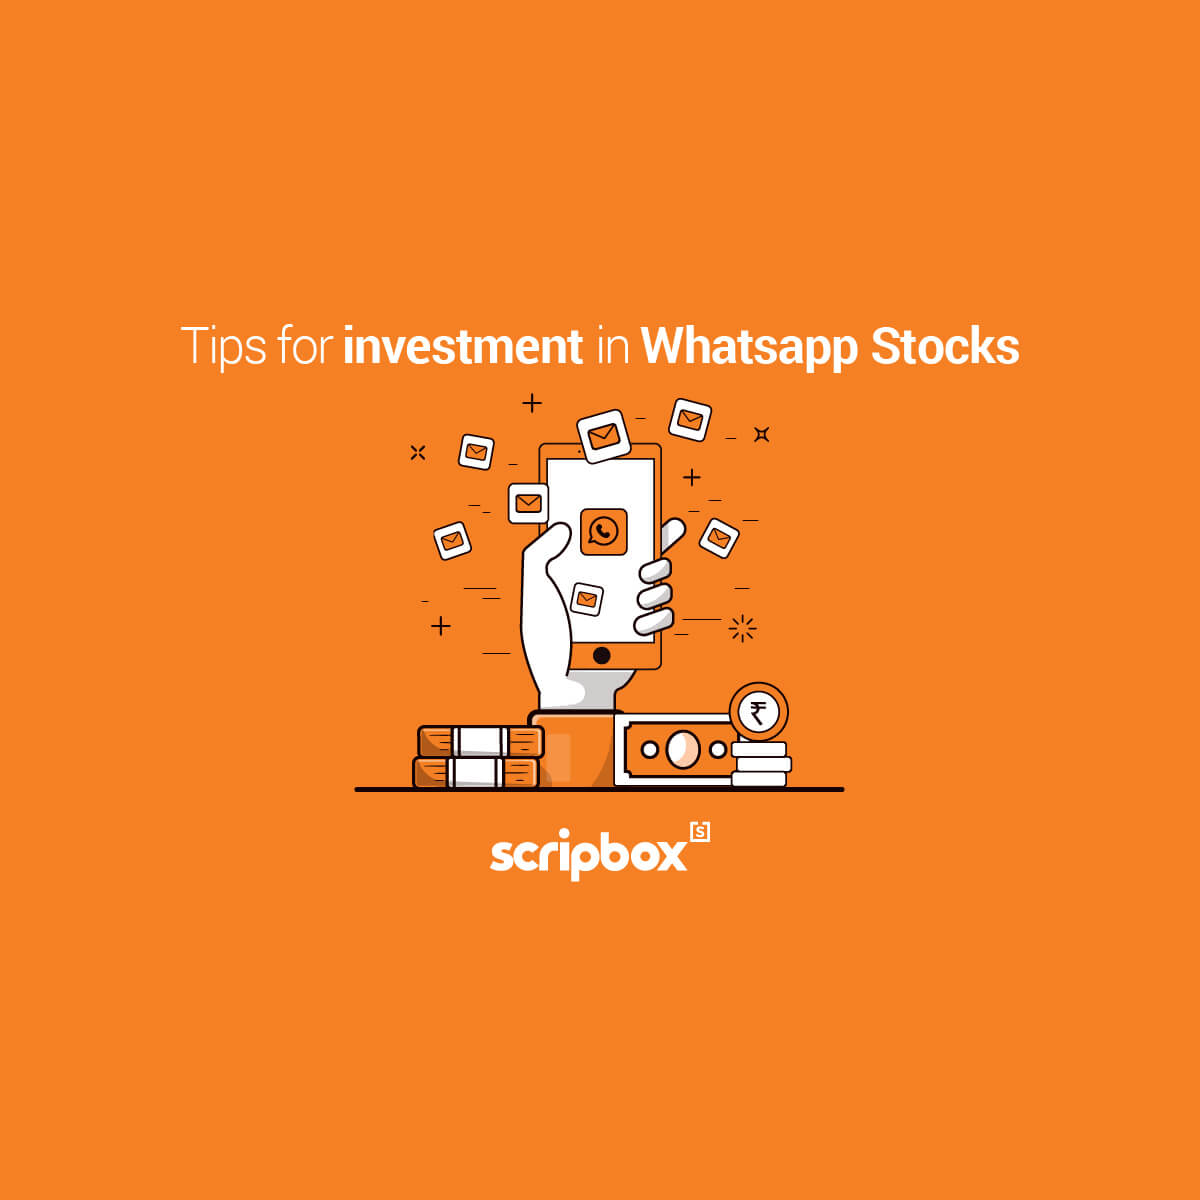 investing on sms whatsapp stock tips